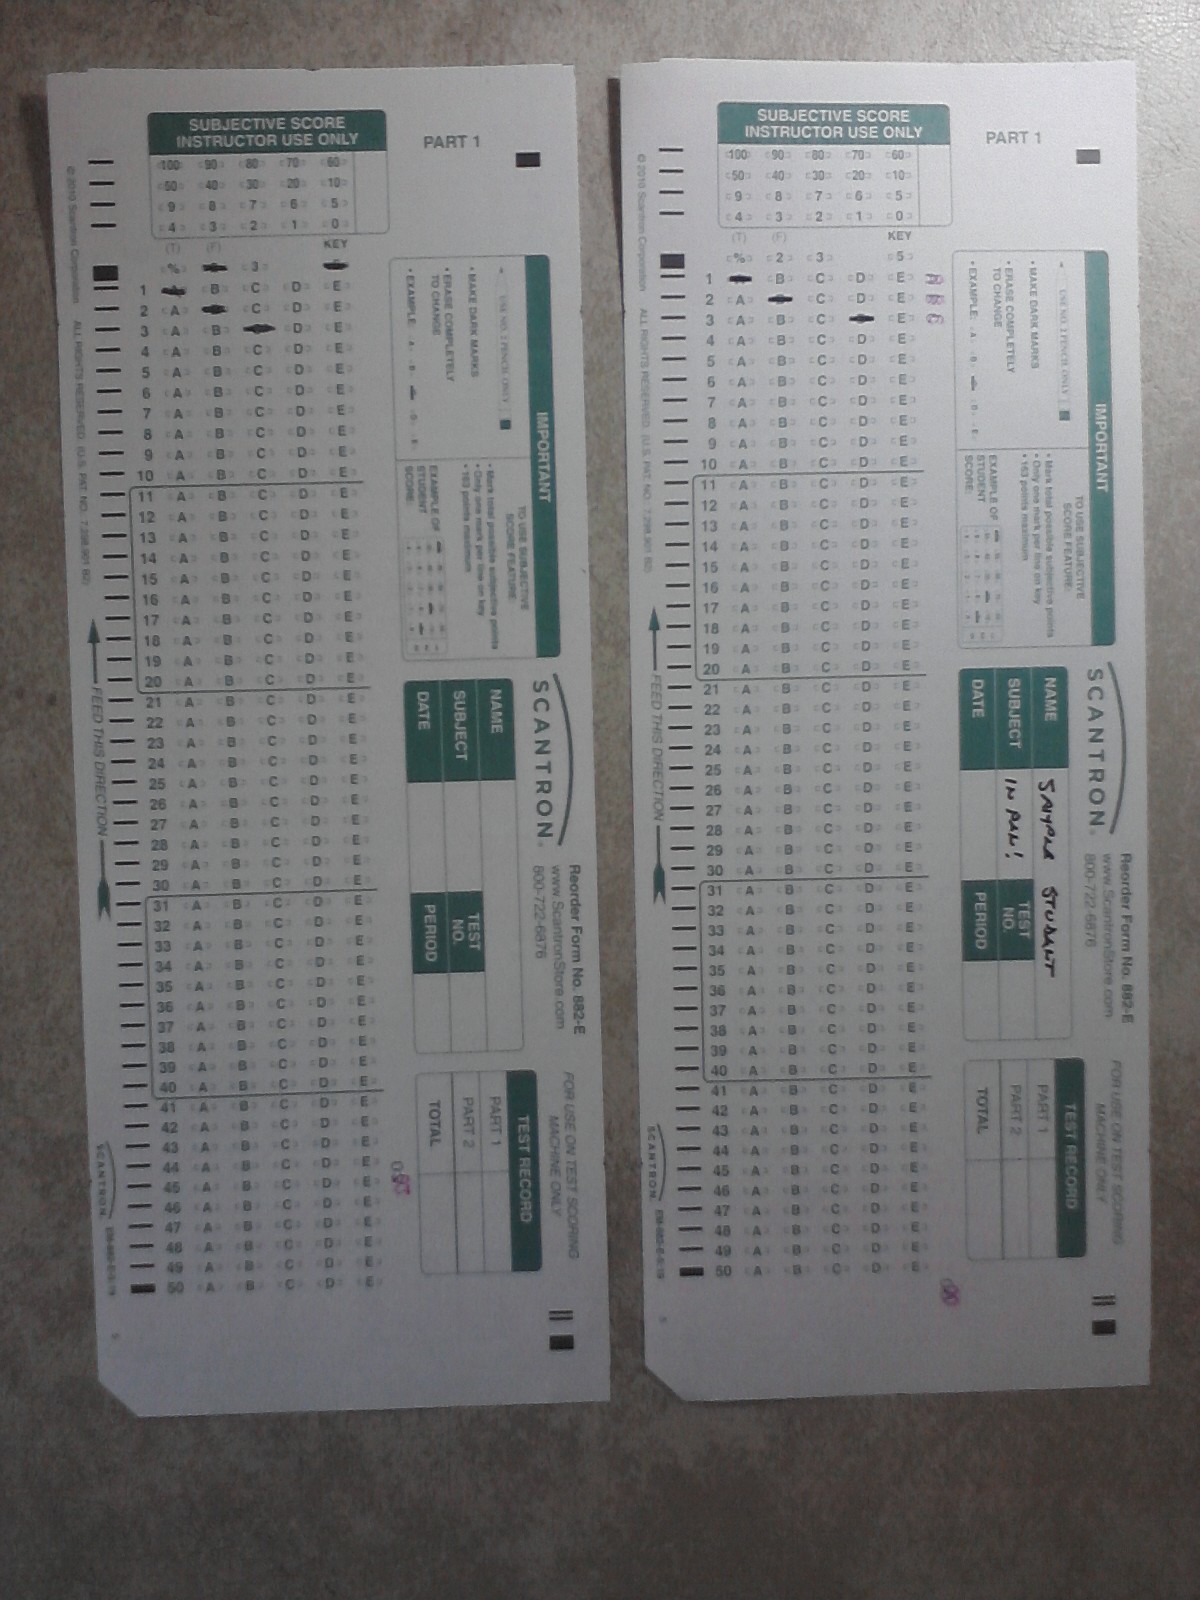 madmath-yes-scantrons-still-require-a-pencil